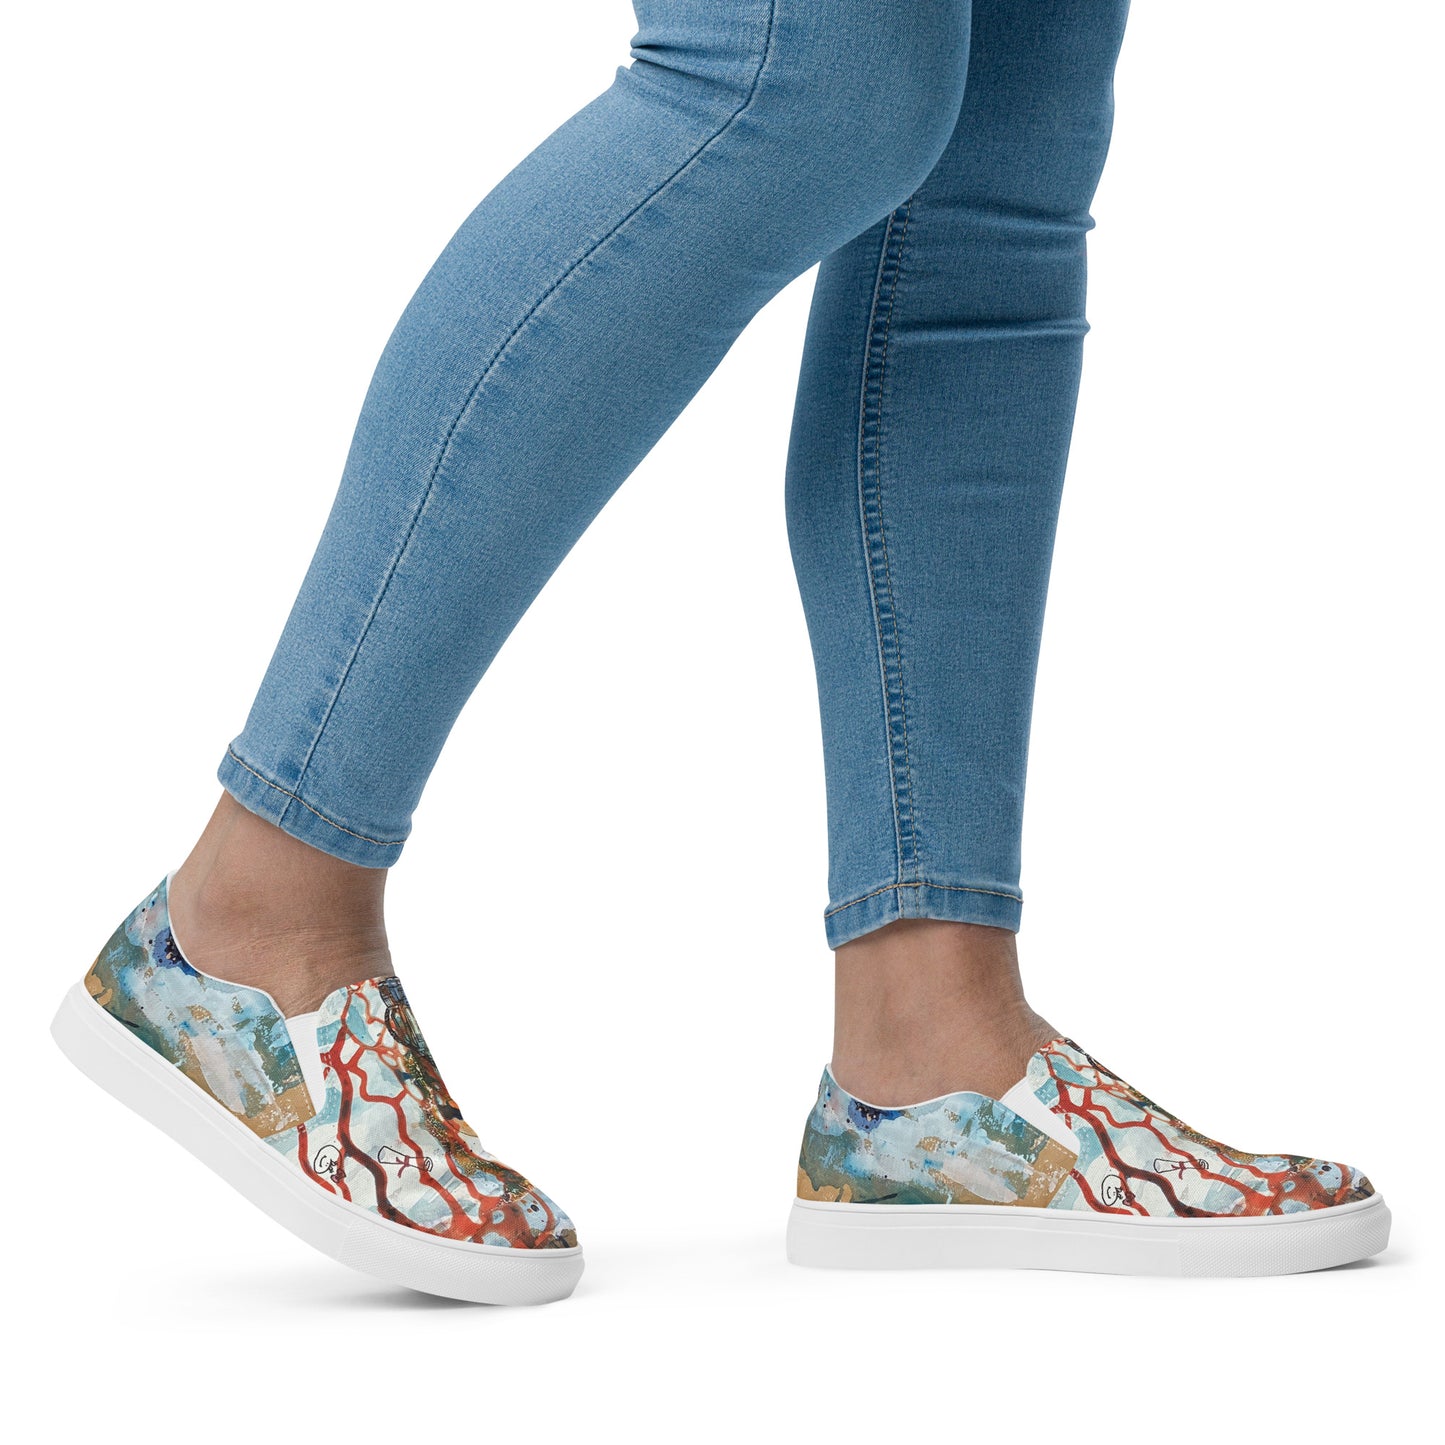 Women’s slip-on canvas shoes - Freedom